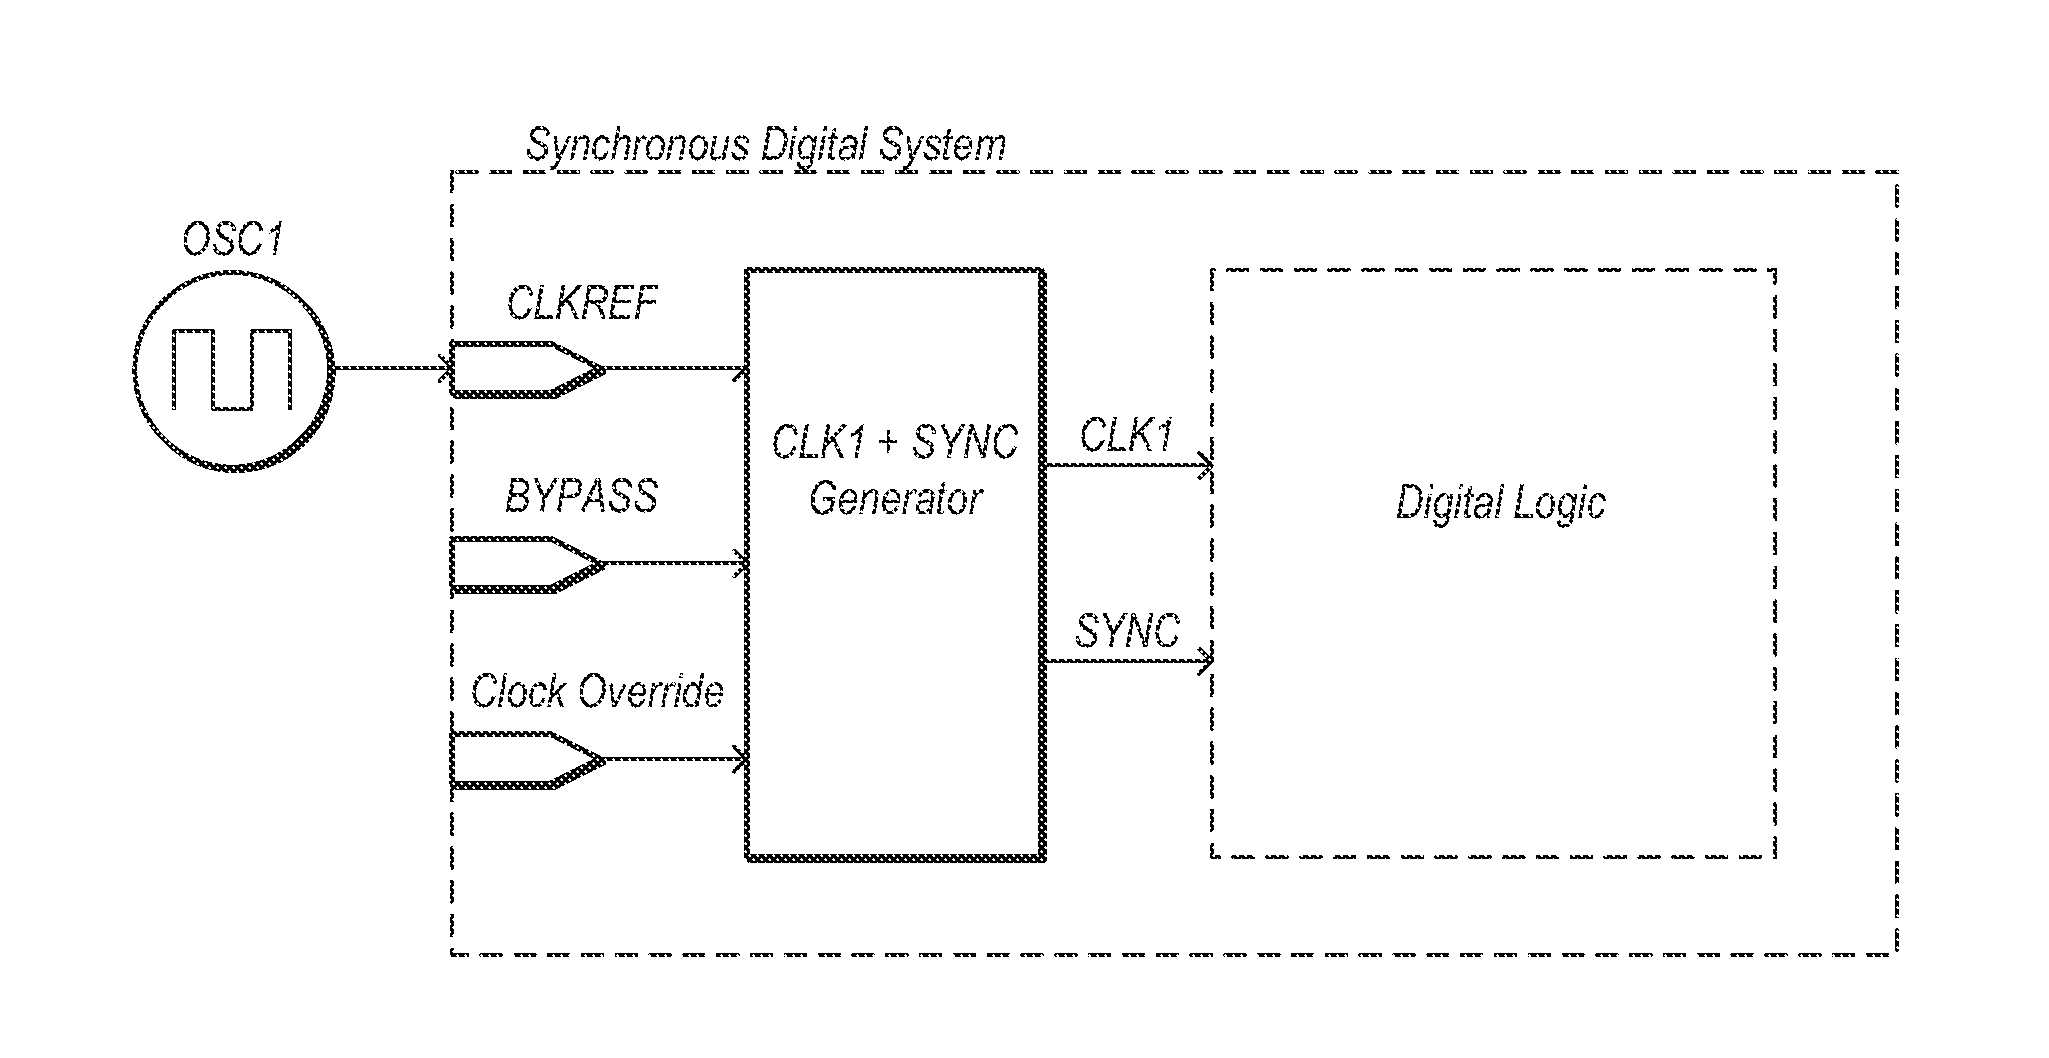 Multi-frequency clock skew control for inter-chip communication in synchronous digital systems